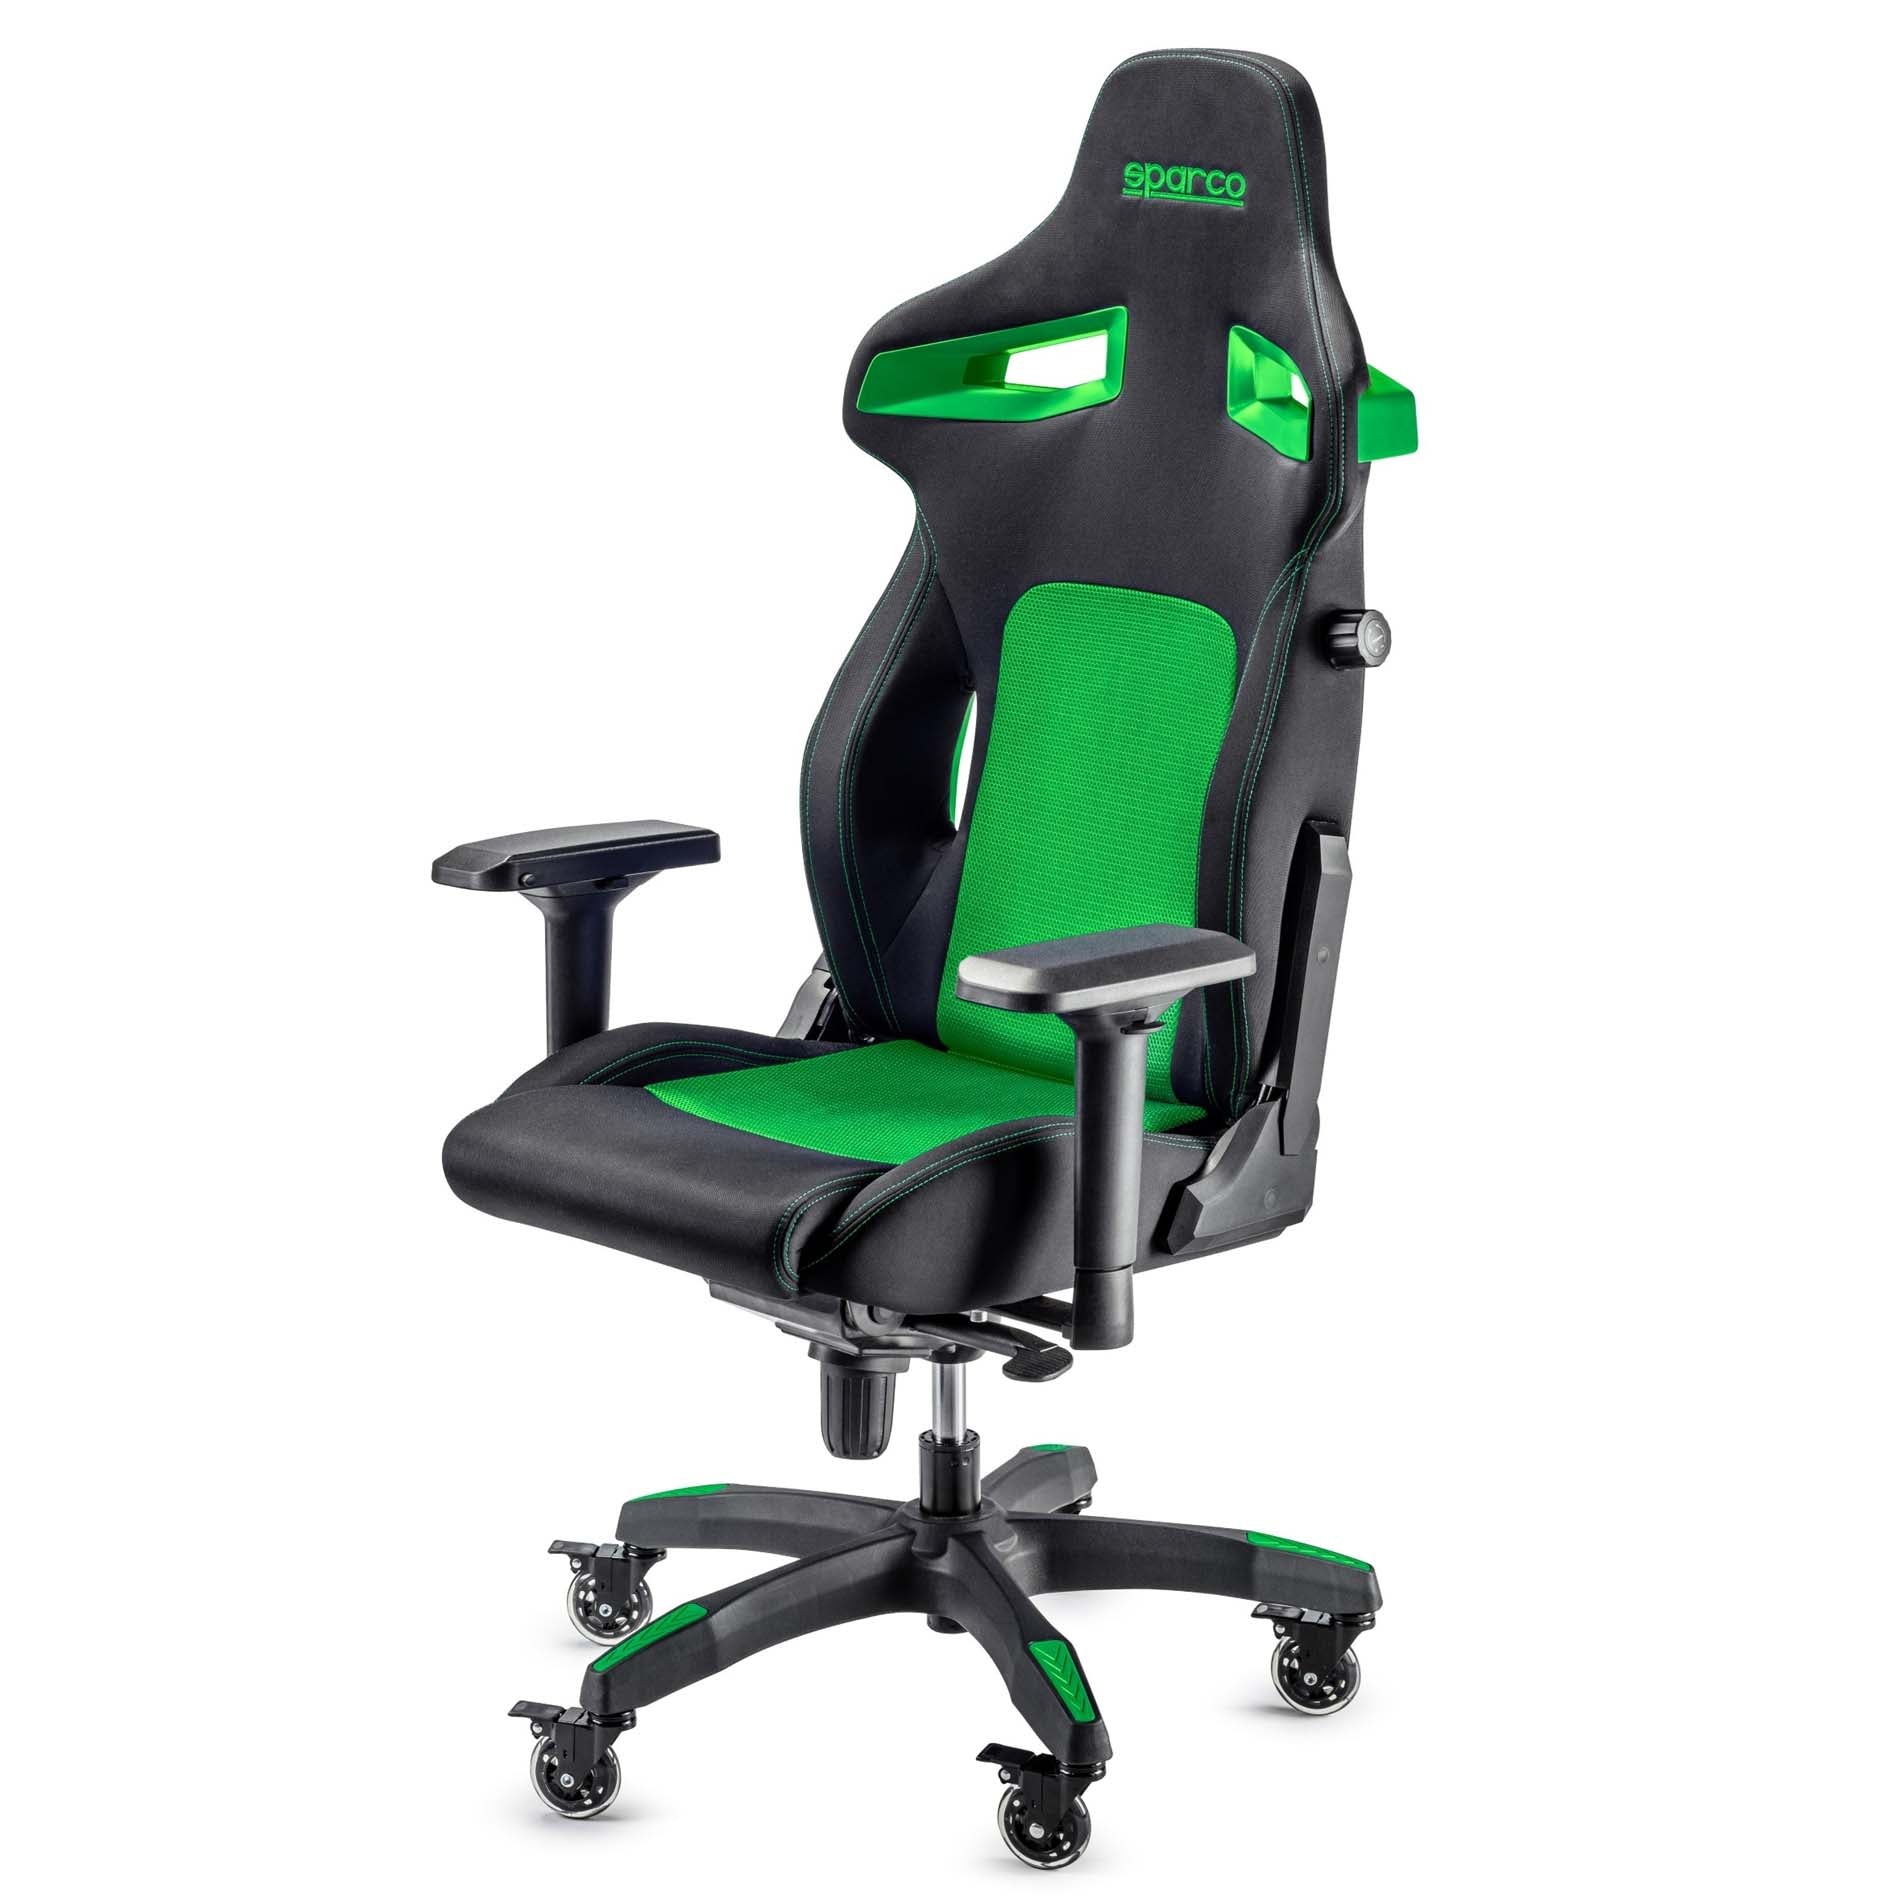 Sparco Stint Gaming Chair